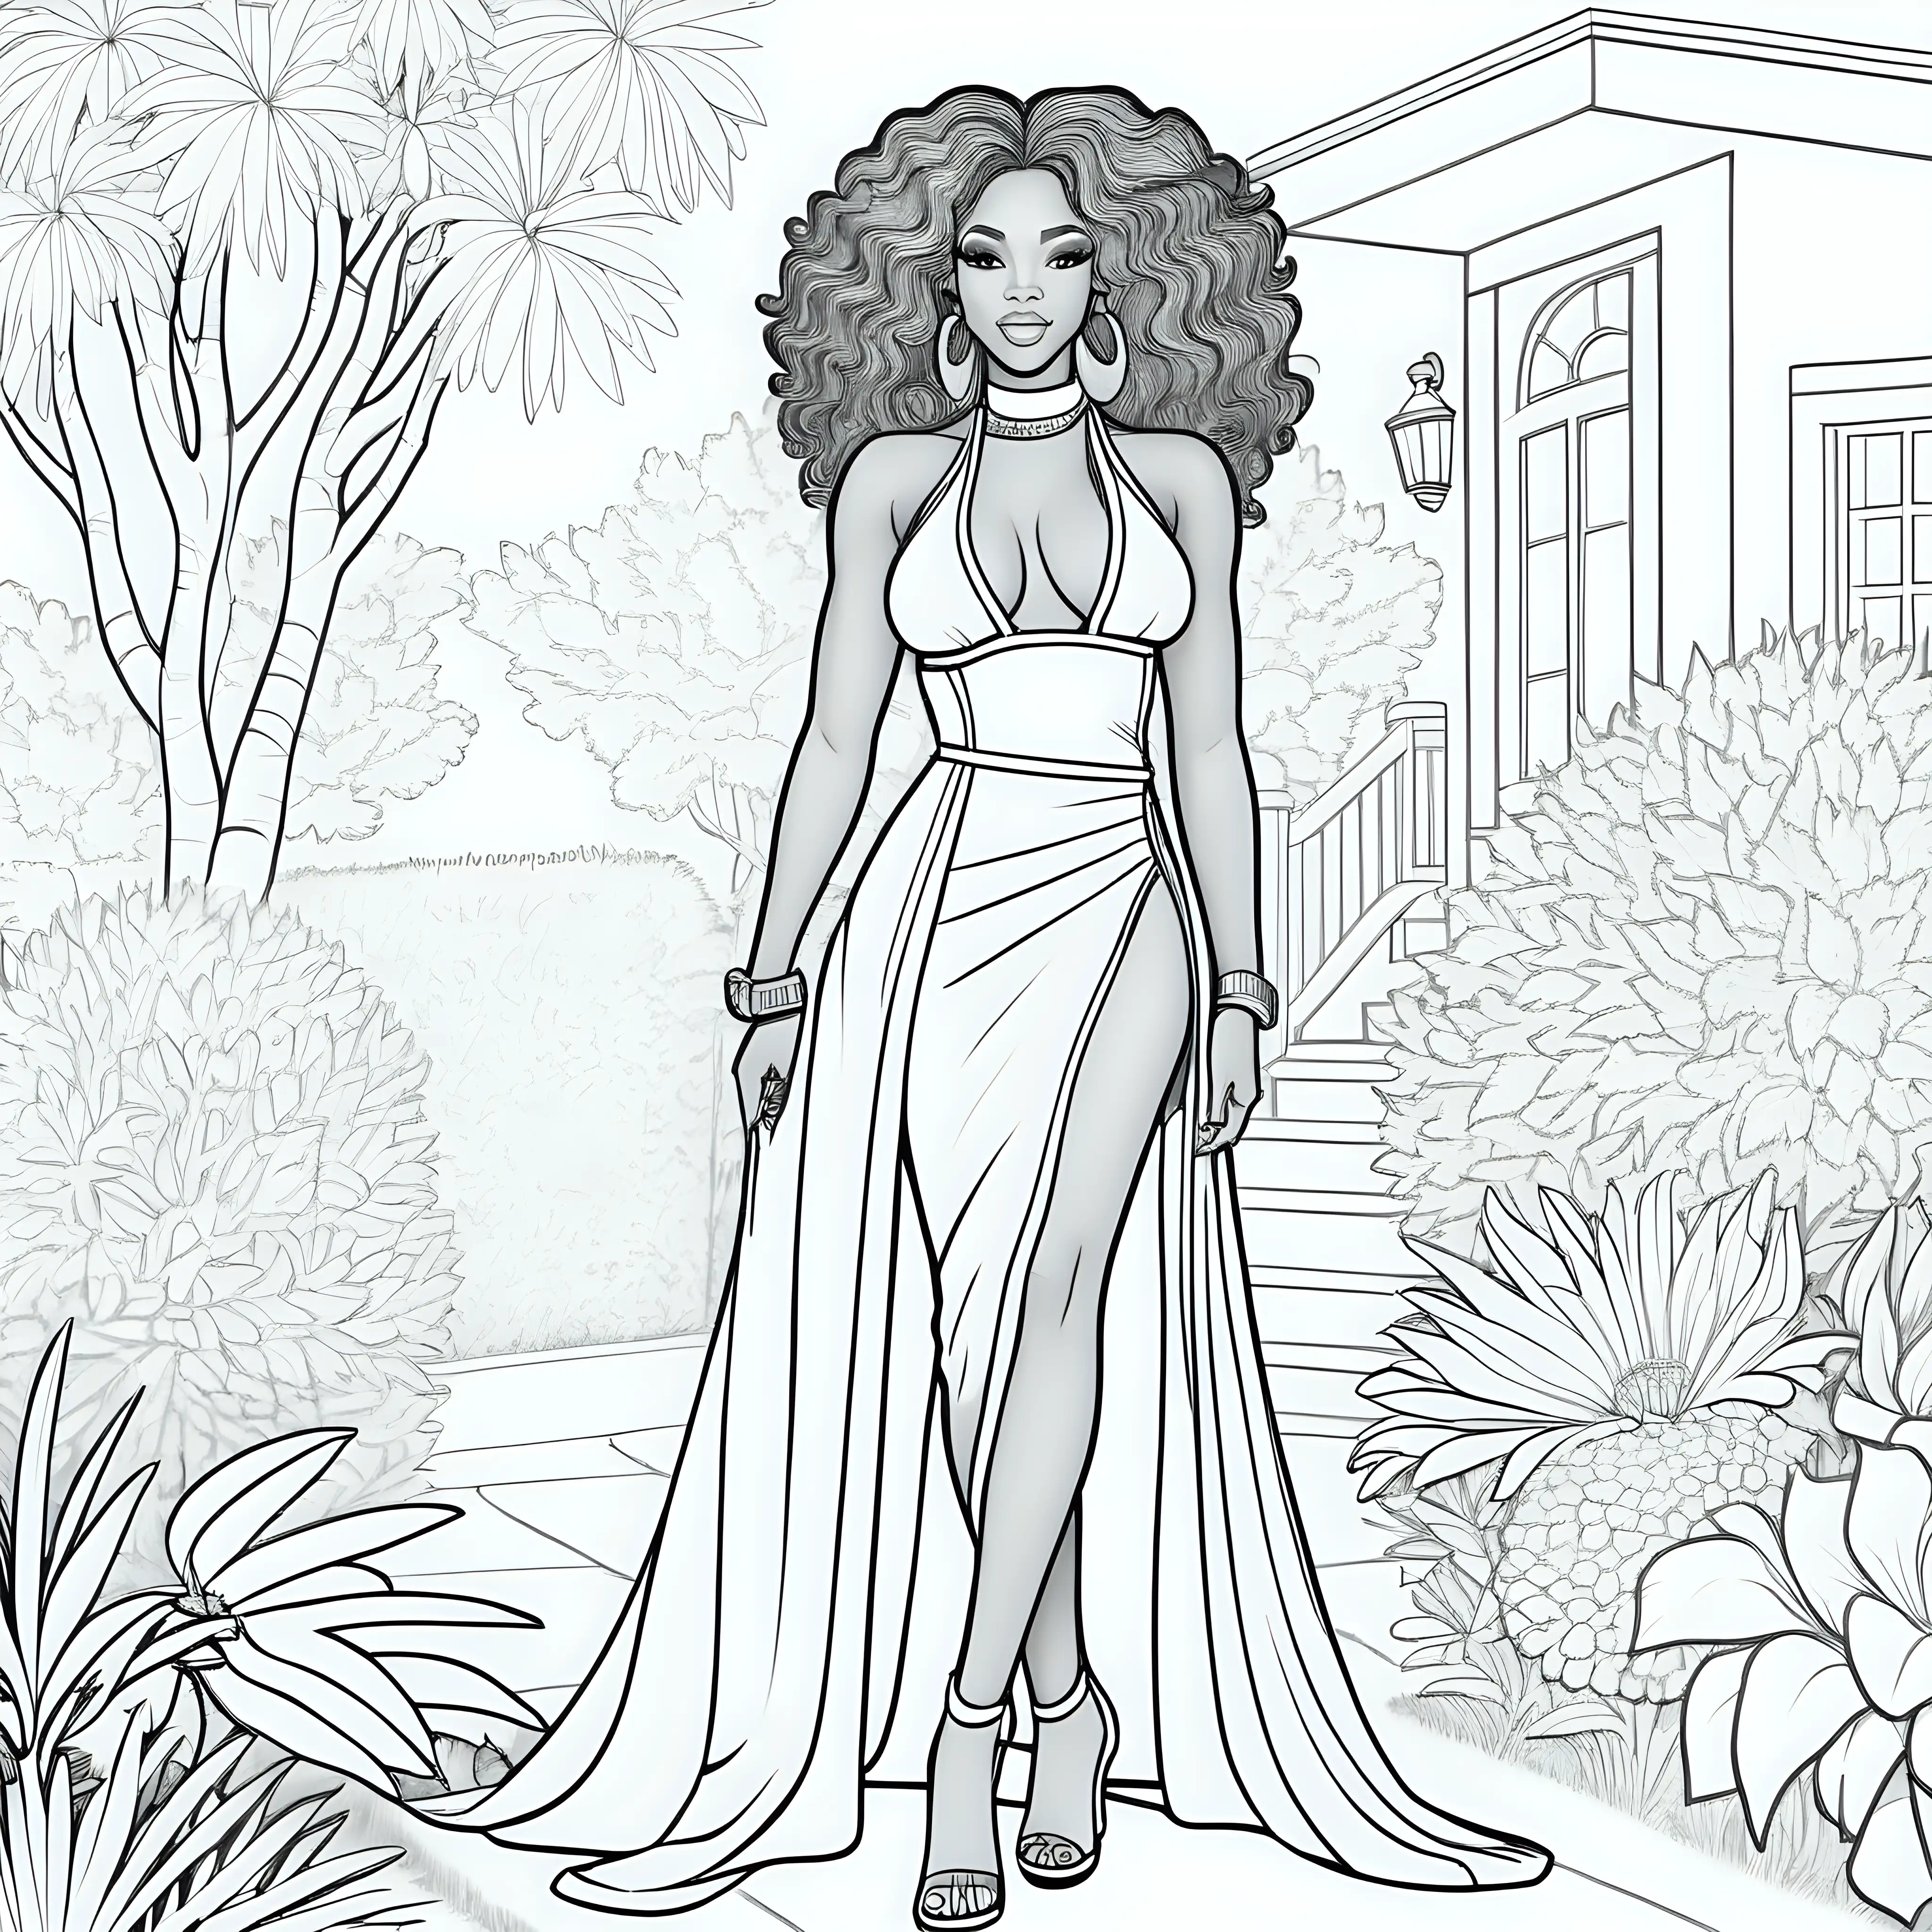 adult coloring book, outline image, no greyscale, no color, no shading,  outline hair only, coloring page style, african american woman, full body pose, sexy fully dressed, designer clothes, fun outside backgrounds, coloring book lines